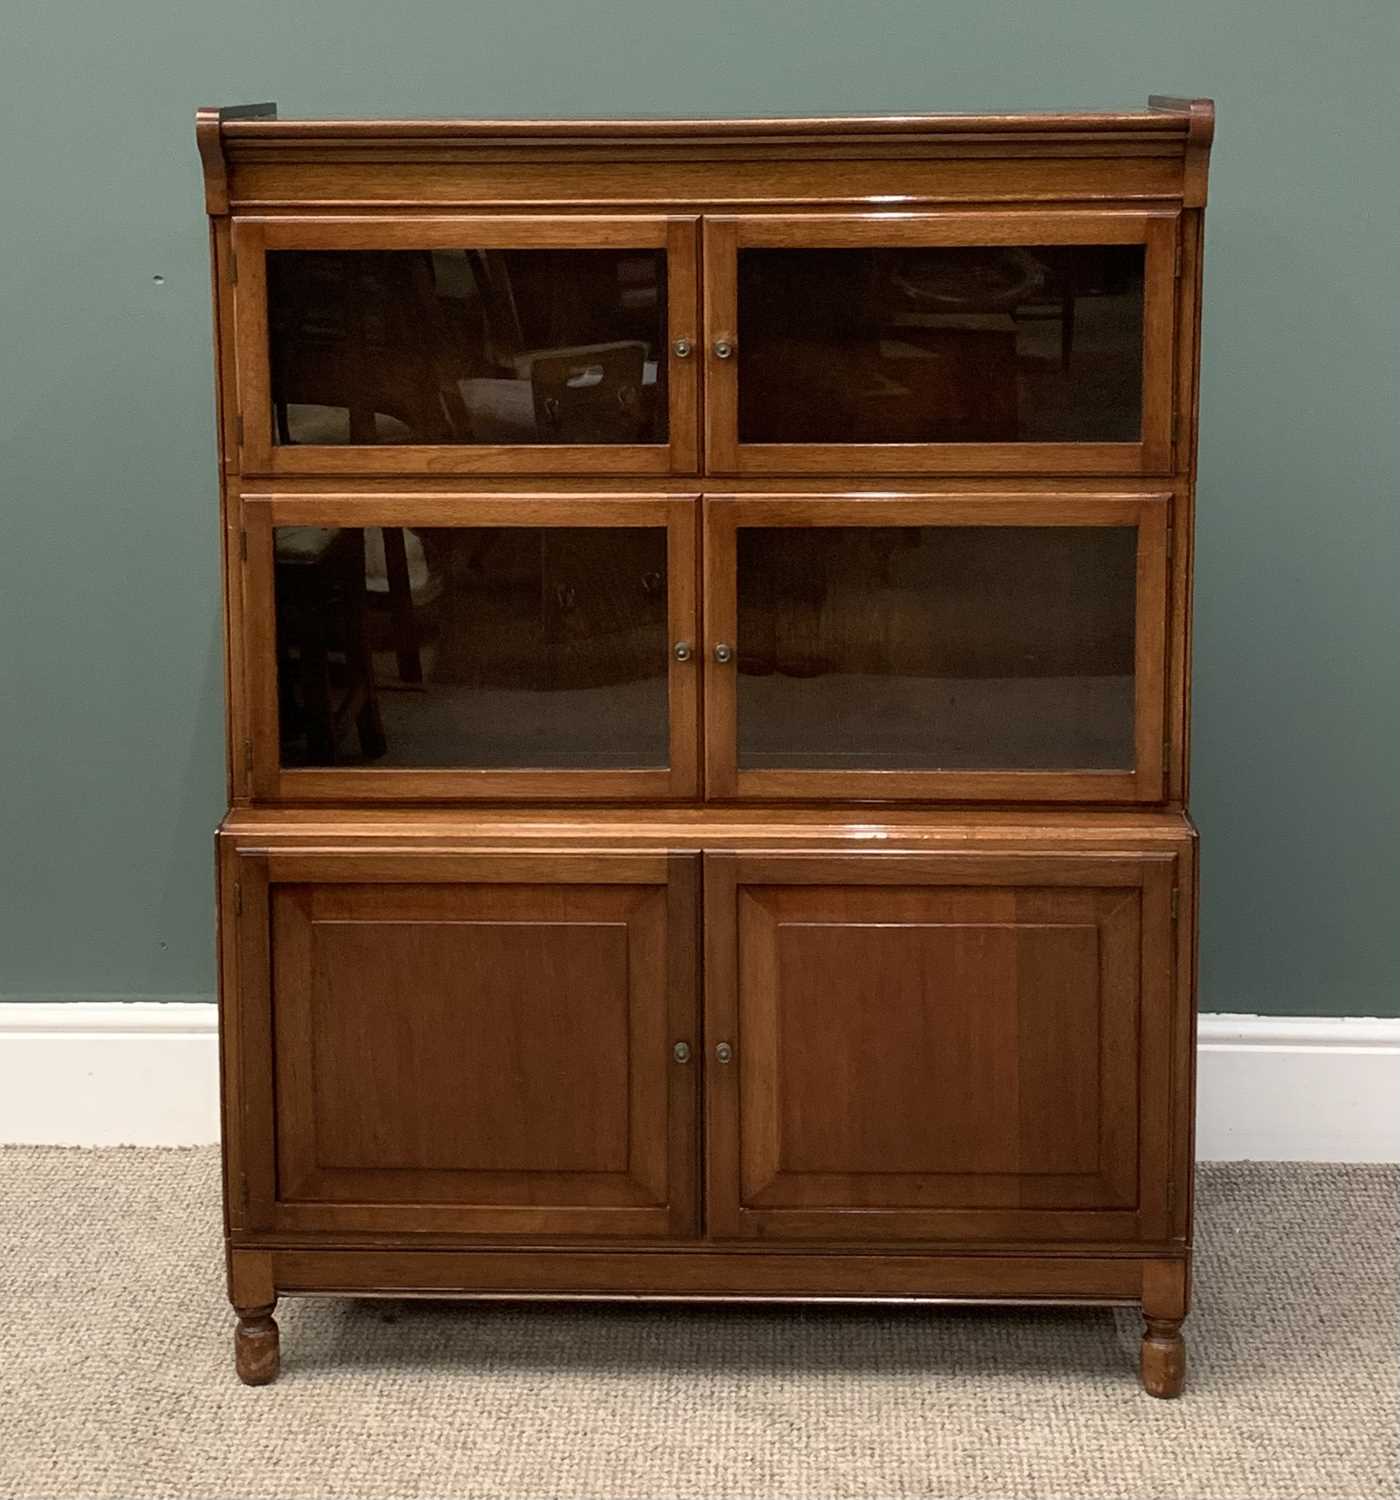 MAHOGANY LIBRARY BOOKCASE having four glazed upper doors over two cupboards, 119 (h) x 89 (w) x